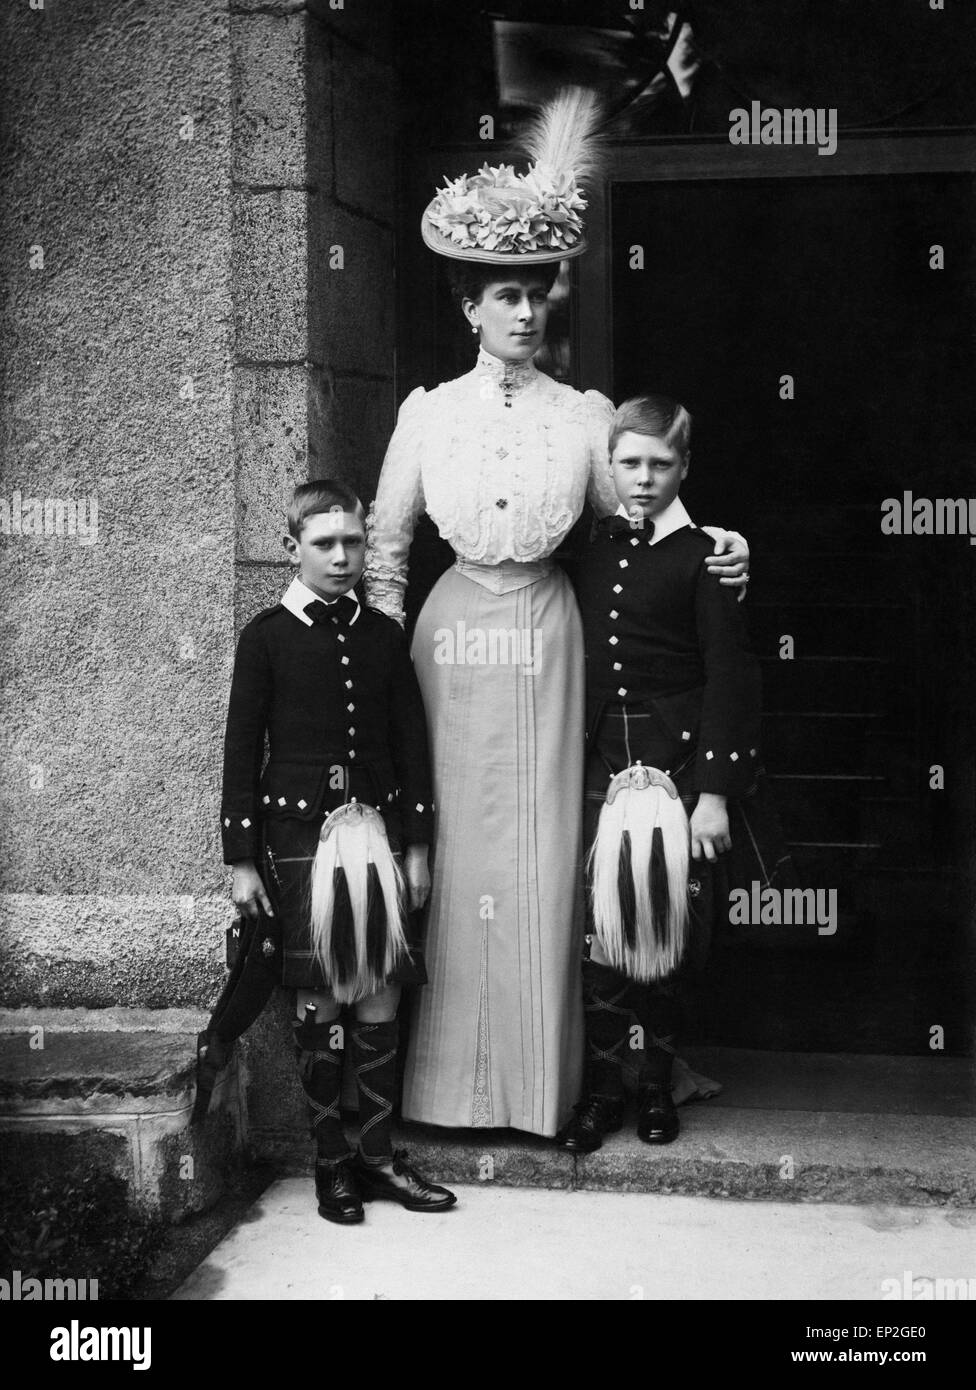 Portrait of Queen Mary with the Prince of Wales and Duke of York, later to become Edward VIII and King George VI. Stock Photo